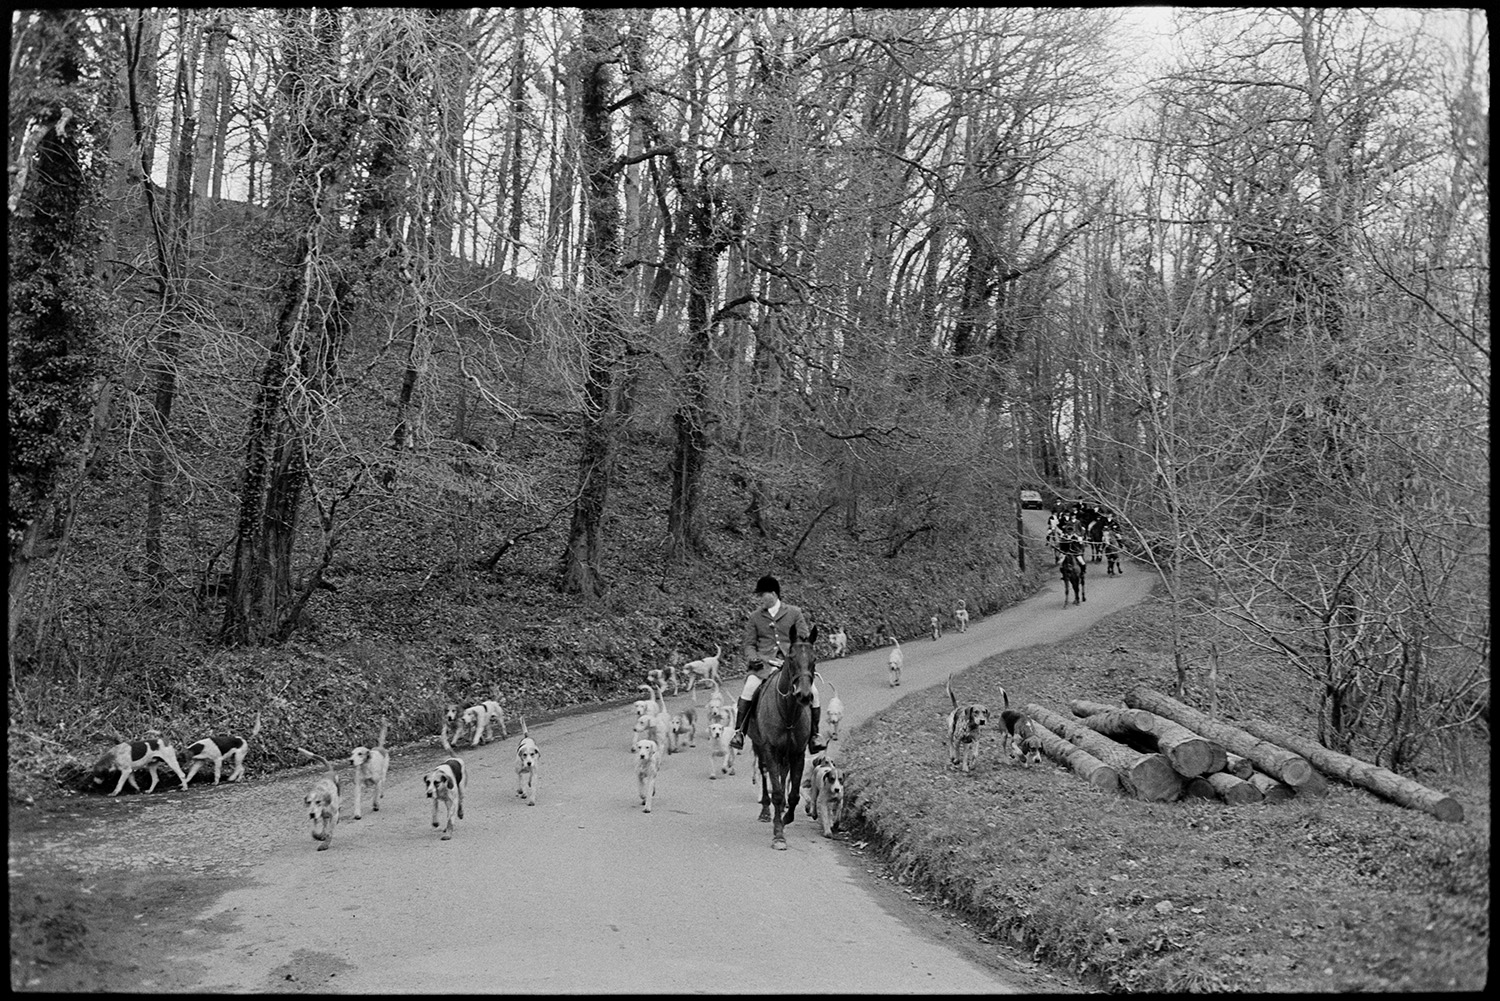 Hunt meet at house, followers and riders waiting, master, hounds setting off through village.
[Hunt Master mounted on a horse and leading a pack of hounds and other hunt riders along a road through woodland at Hackwells, Dolton. A pile of cut logs can be seen on the side of the road.]